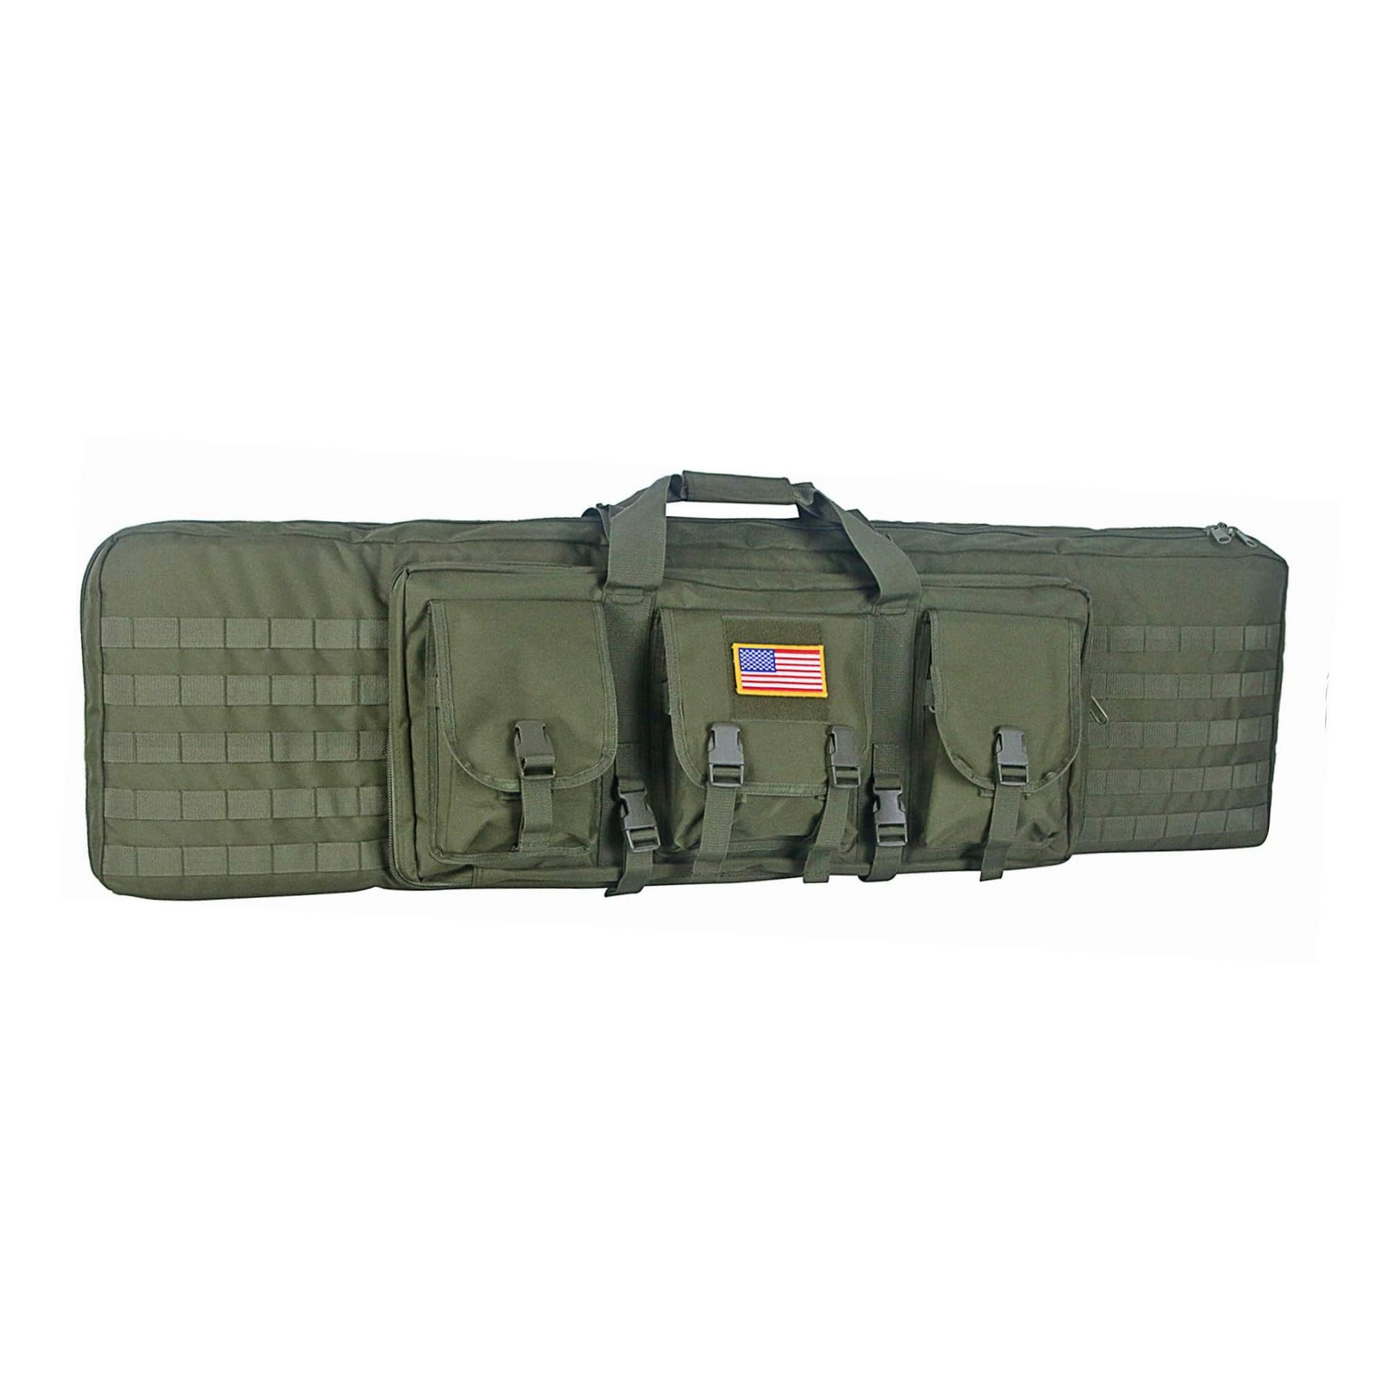 Double rifle case with 42-inch capacity for American Classic tactical firearms